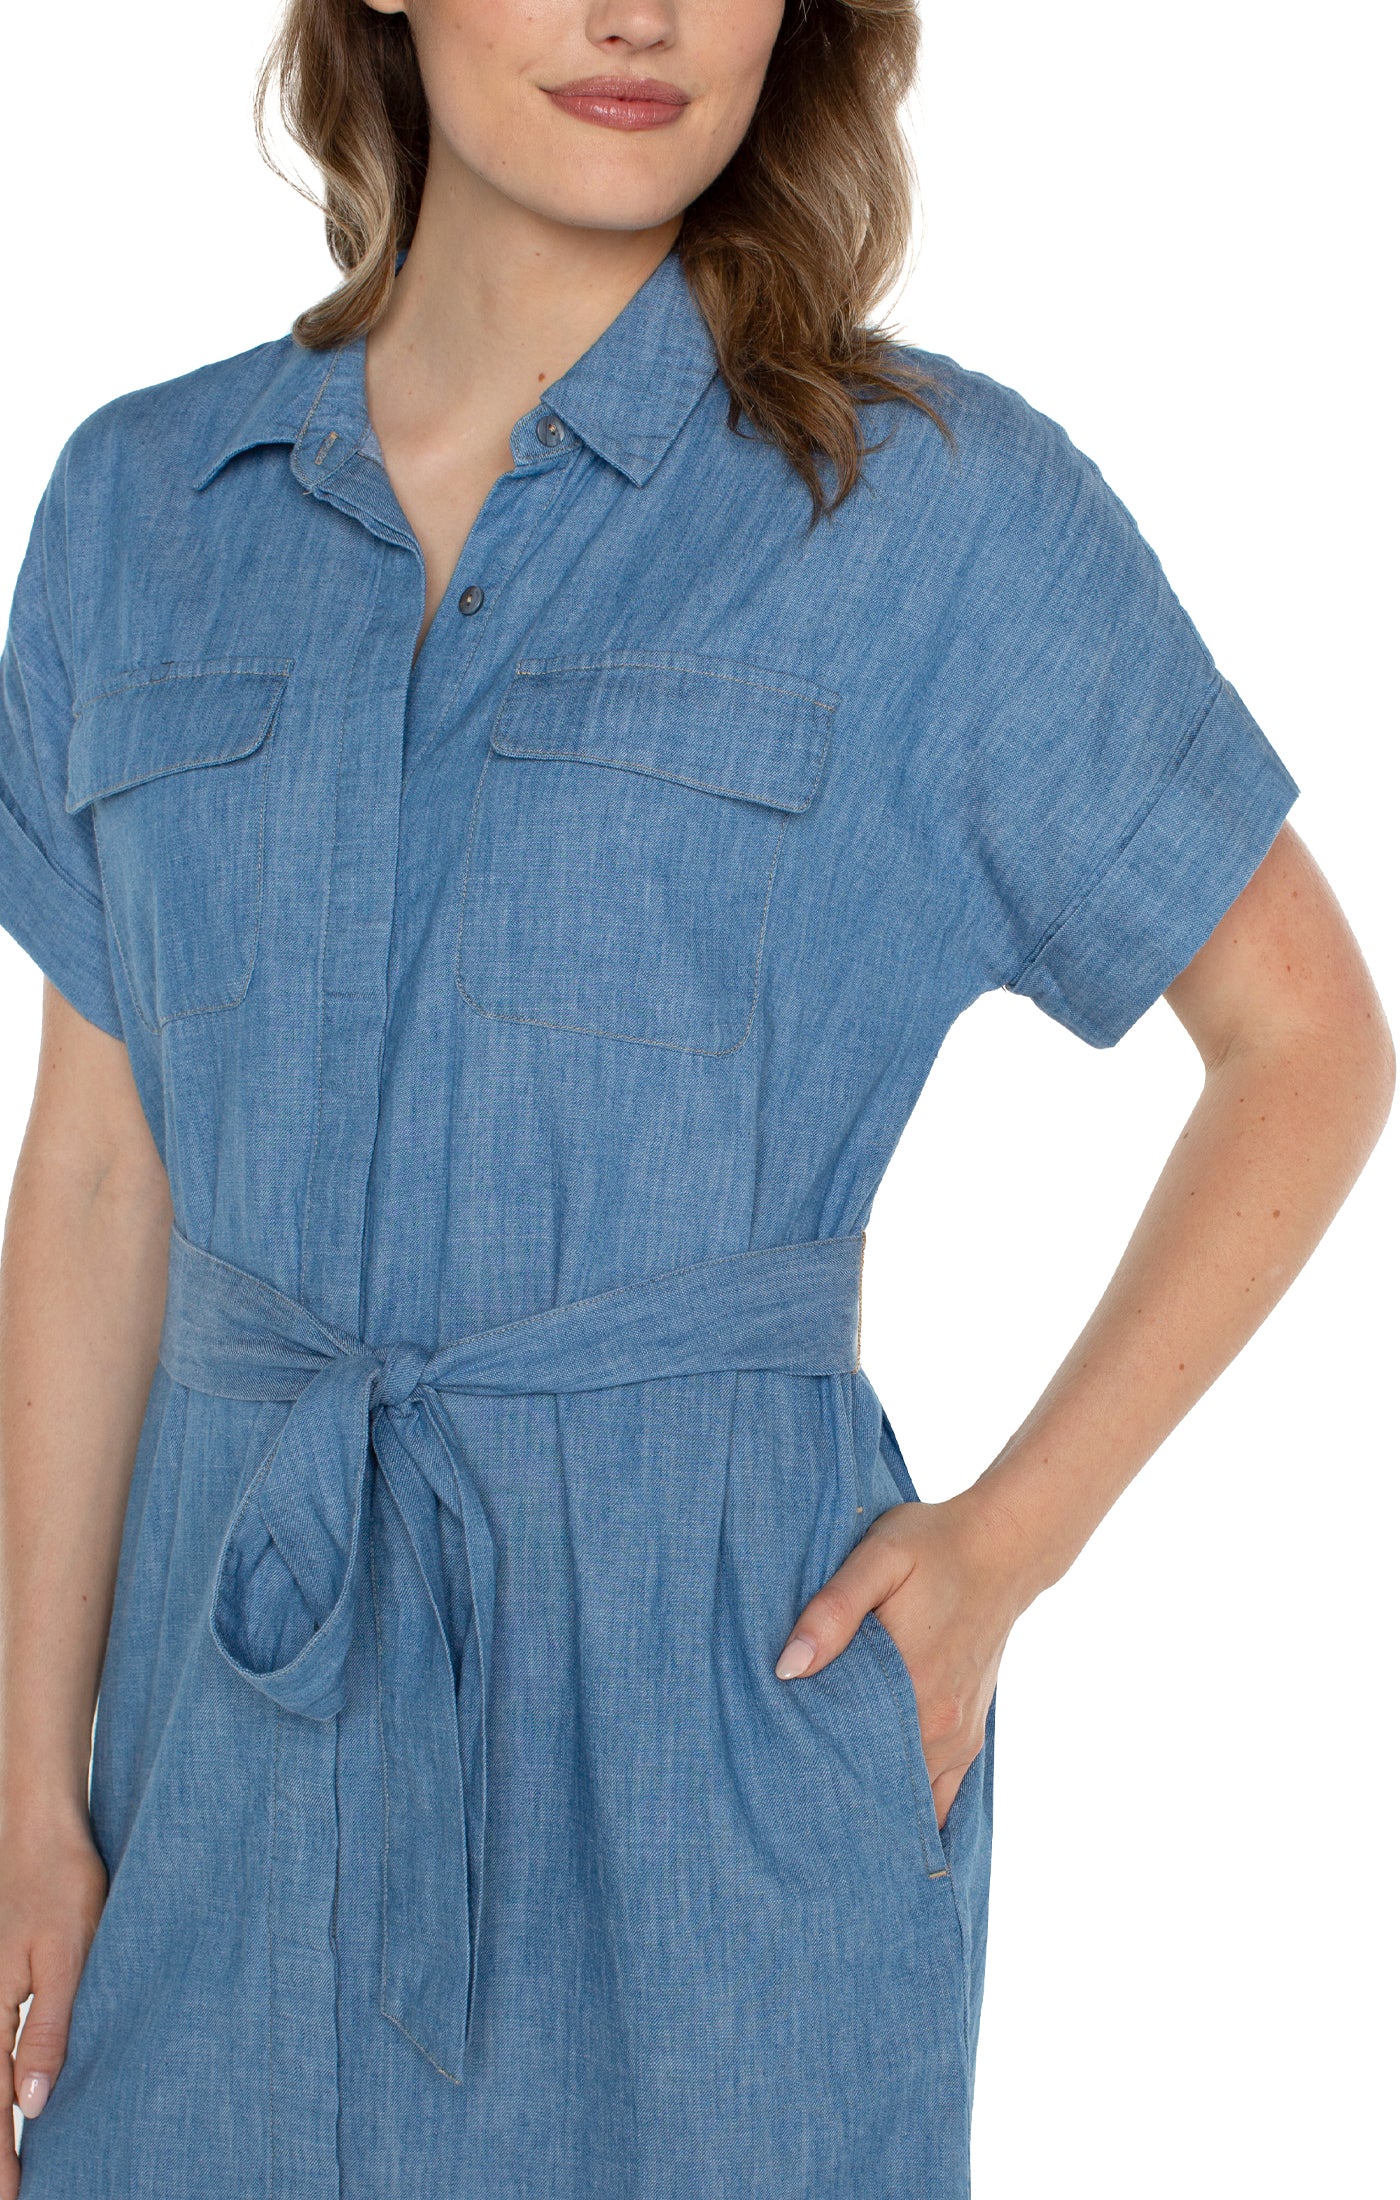 Liverpool Belted Shirt Dress Chambray CLose Up View